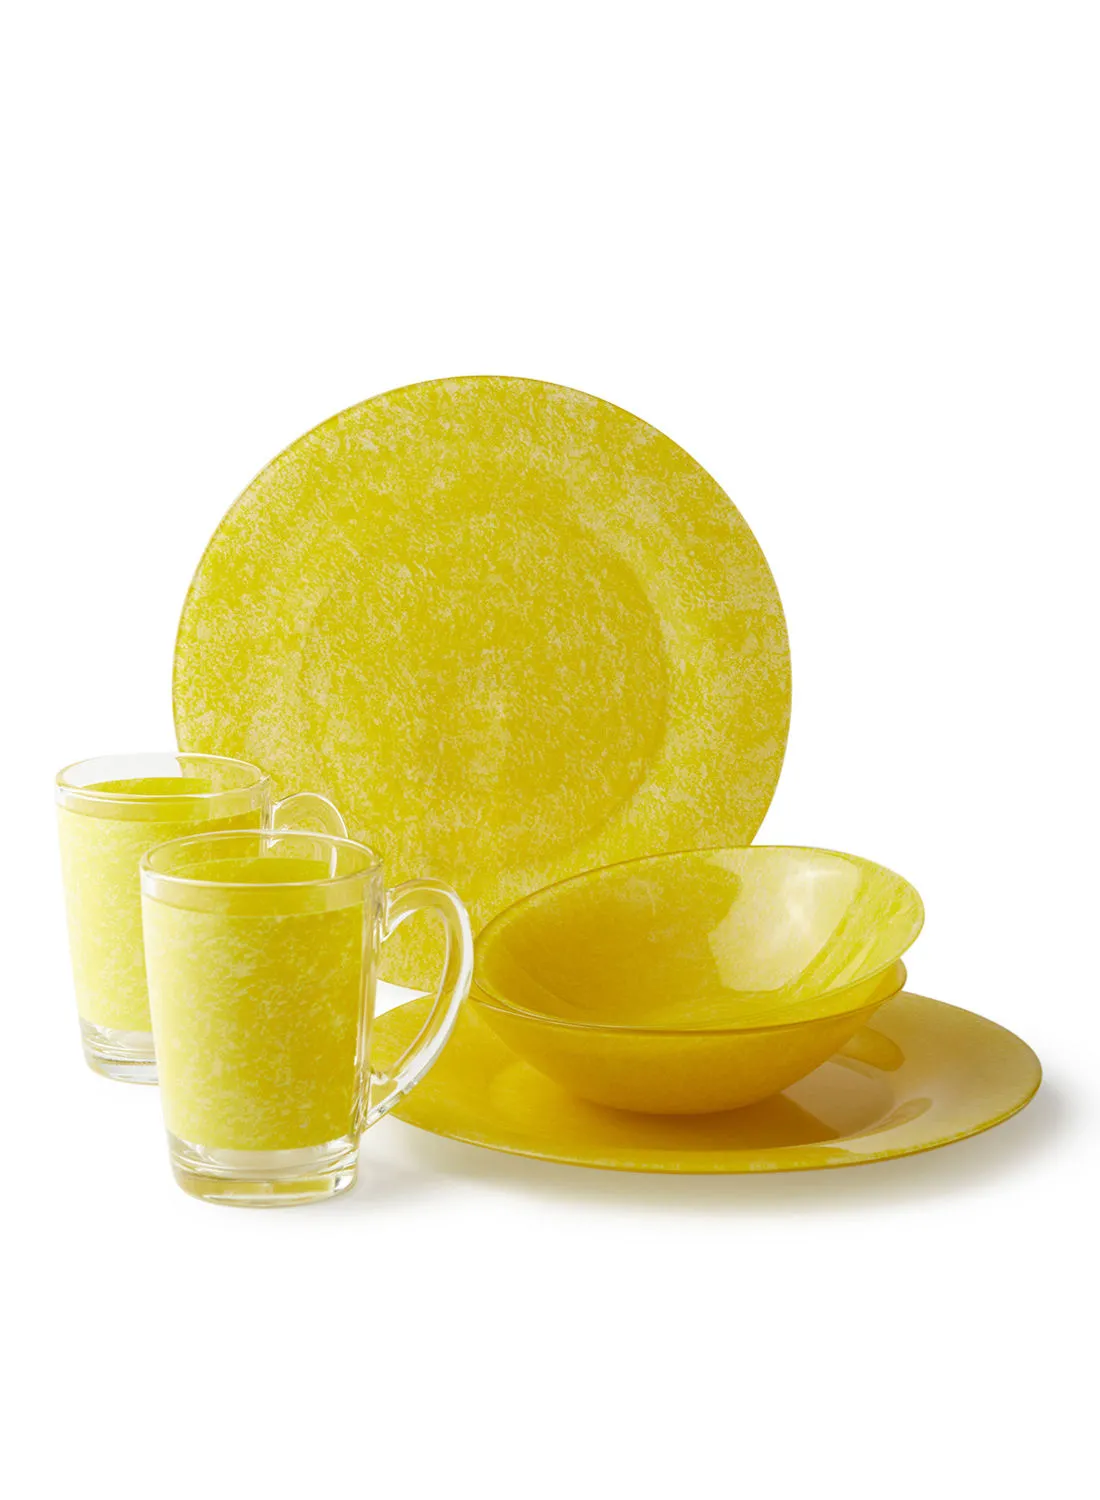 noon east 6 Piece Glass Dinner Set For Everyday Use - Light Weight Dishes, Plates - Dinner Plate, Bowl - Serves 2 - Yellow